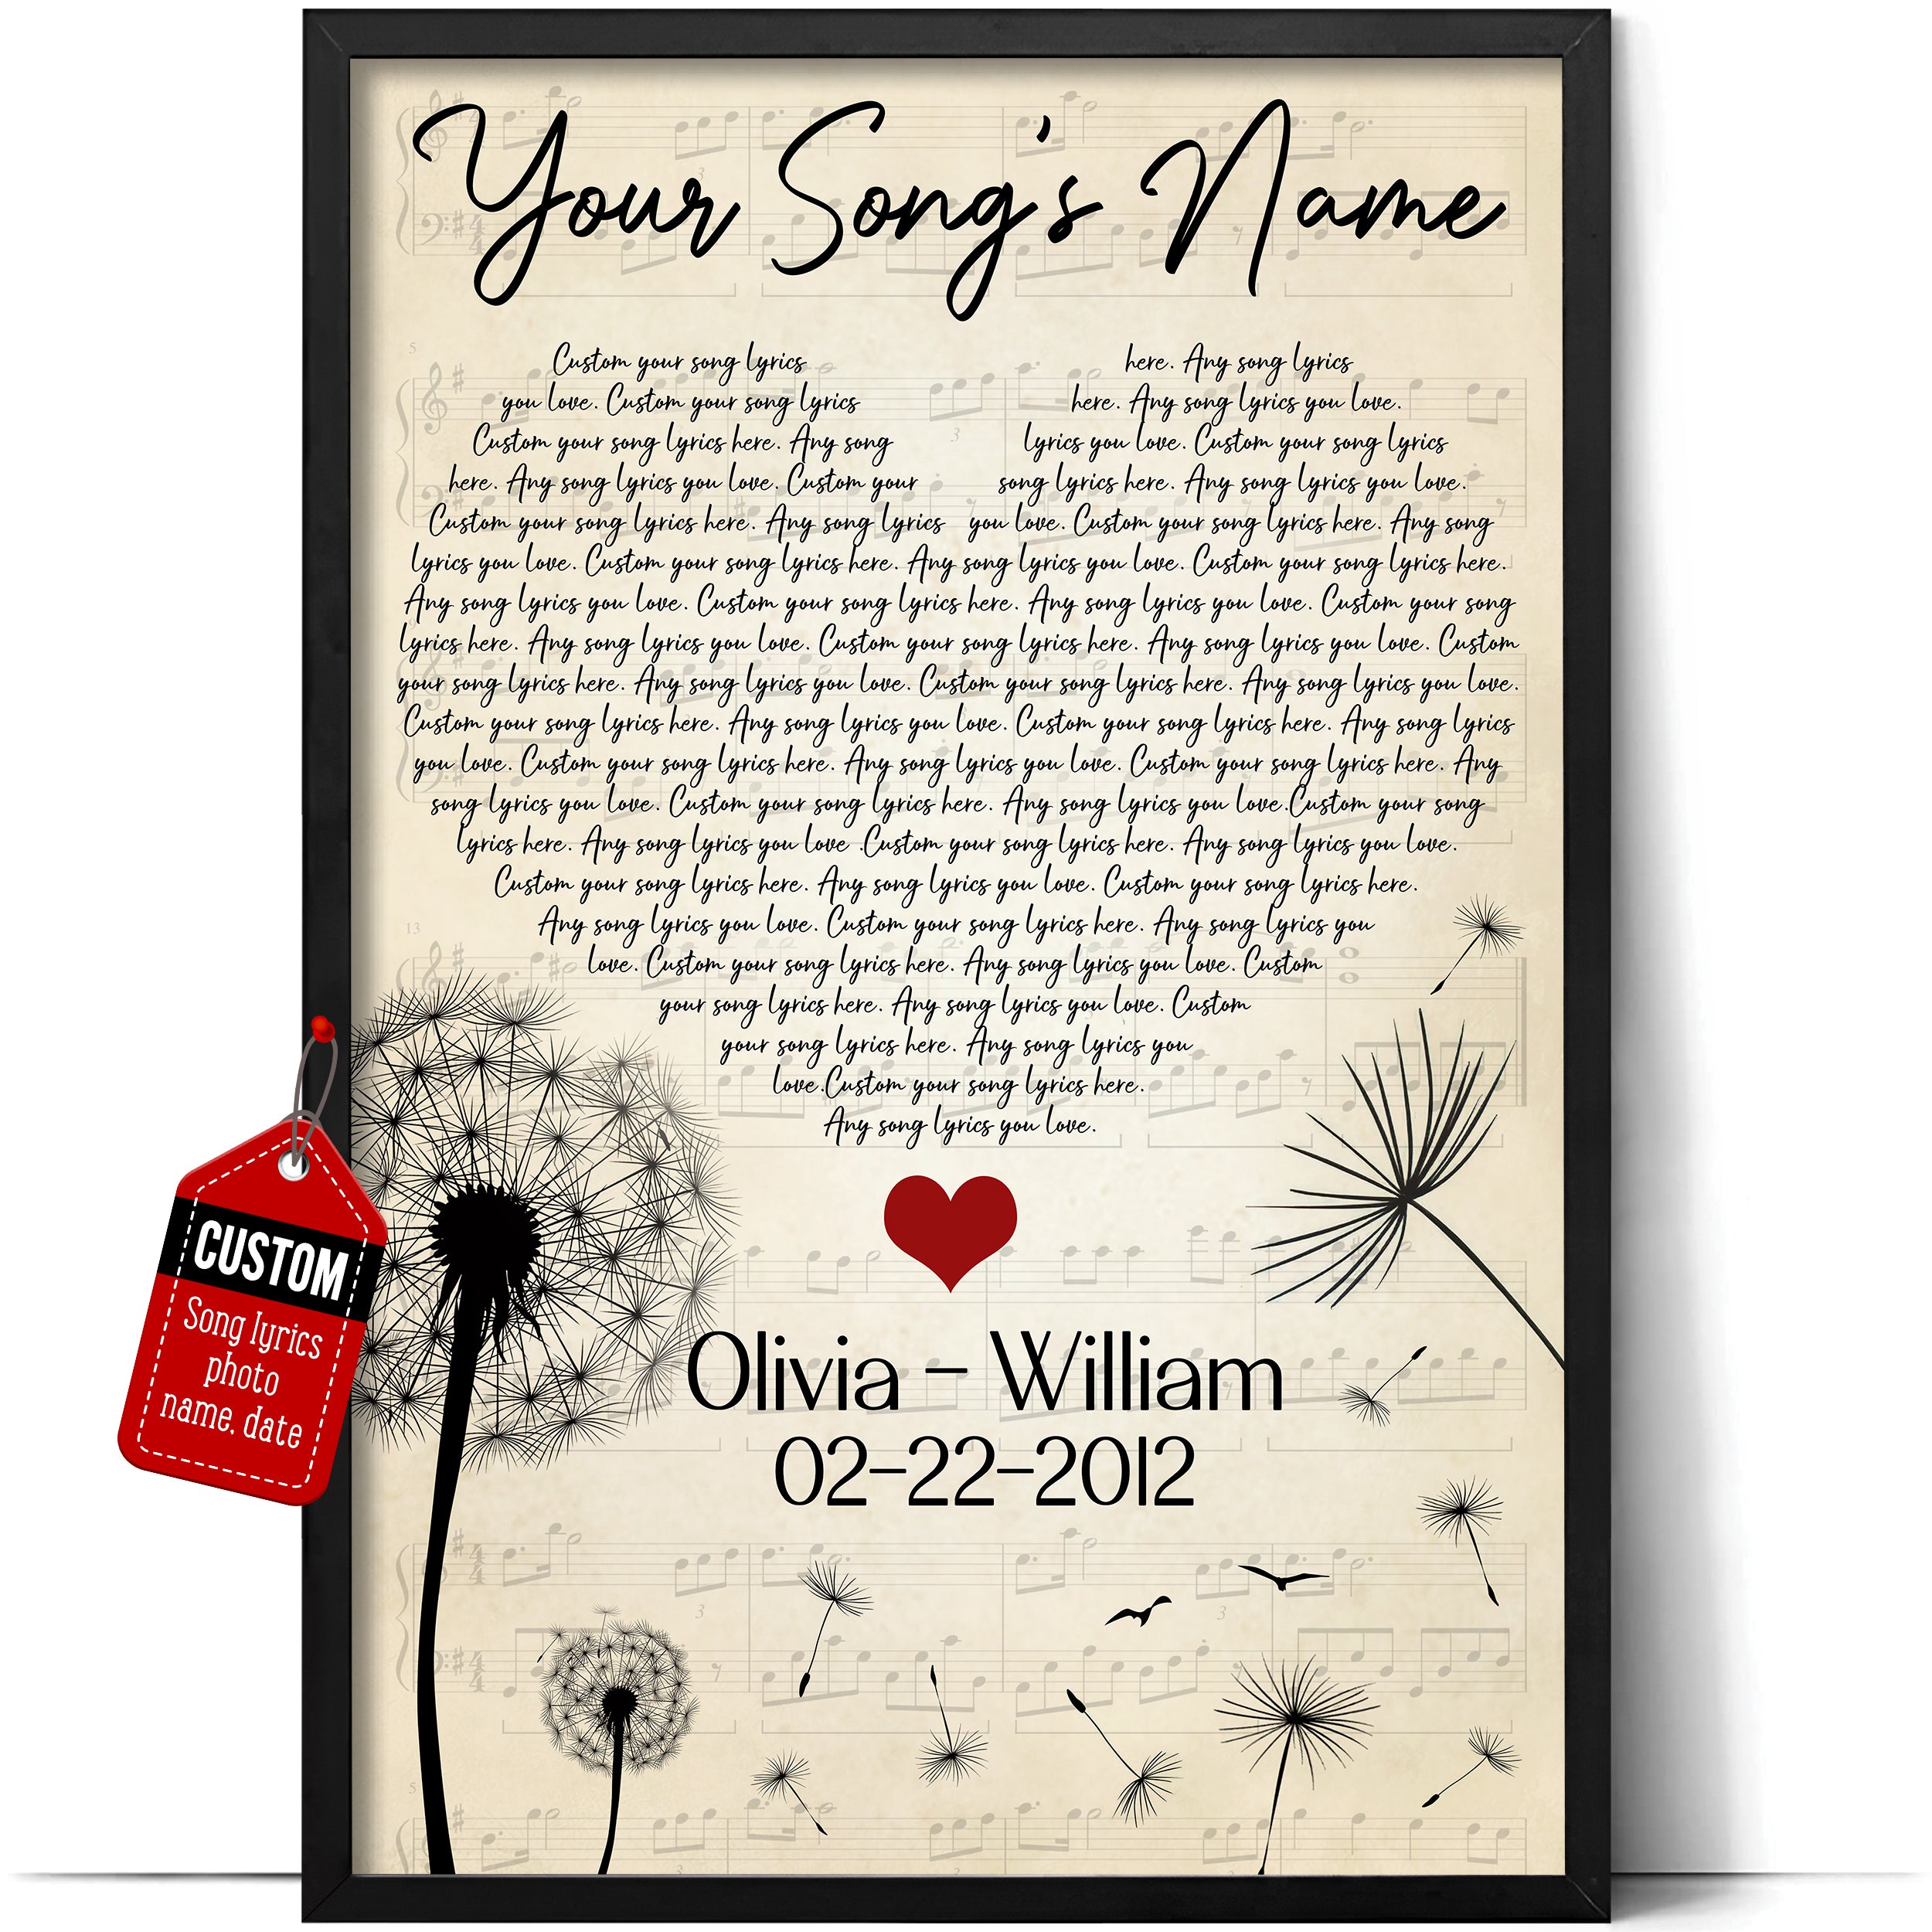  H-DEWALL Personalized Song Lyrics Poster Photo Gifts For Your  Boyfriend Image Poster Wall Art Frame Music Artist Customized Canvas Framed  Photo Art Work For The Bedroom(Gifts For Valentine): Posters & Prints